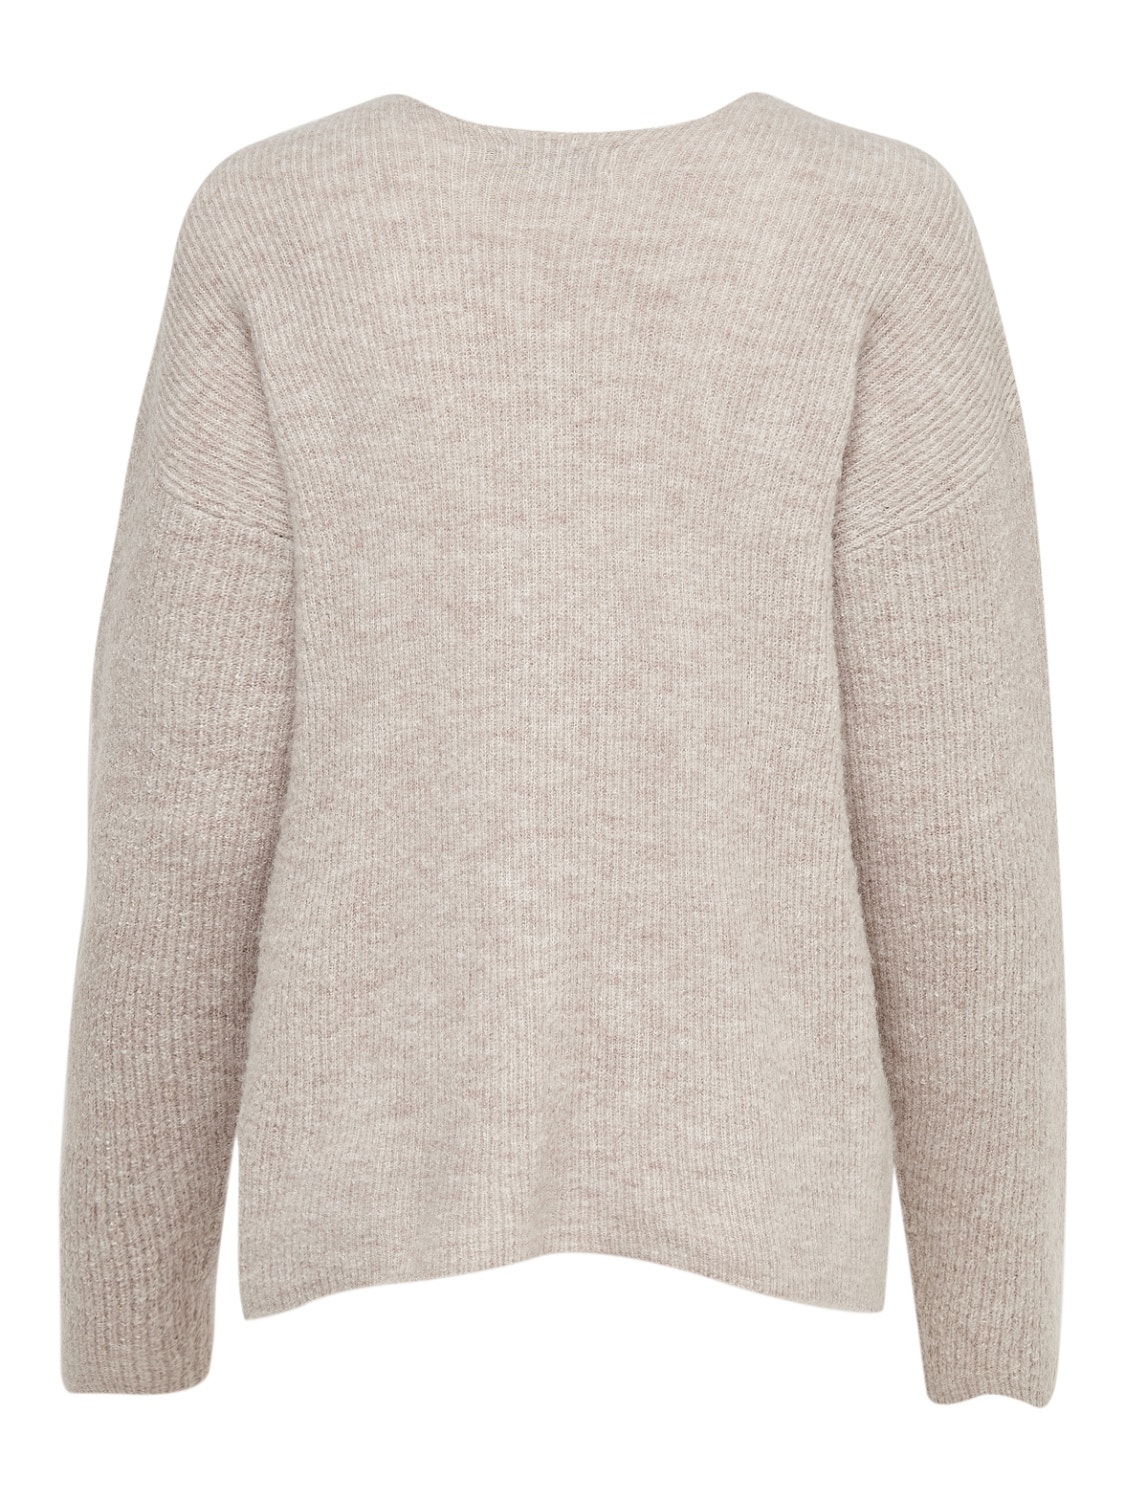 ONLY V-neck Knitted Pullover -Pumice Stone - 15204588